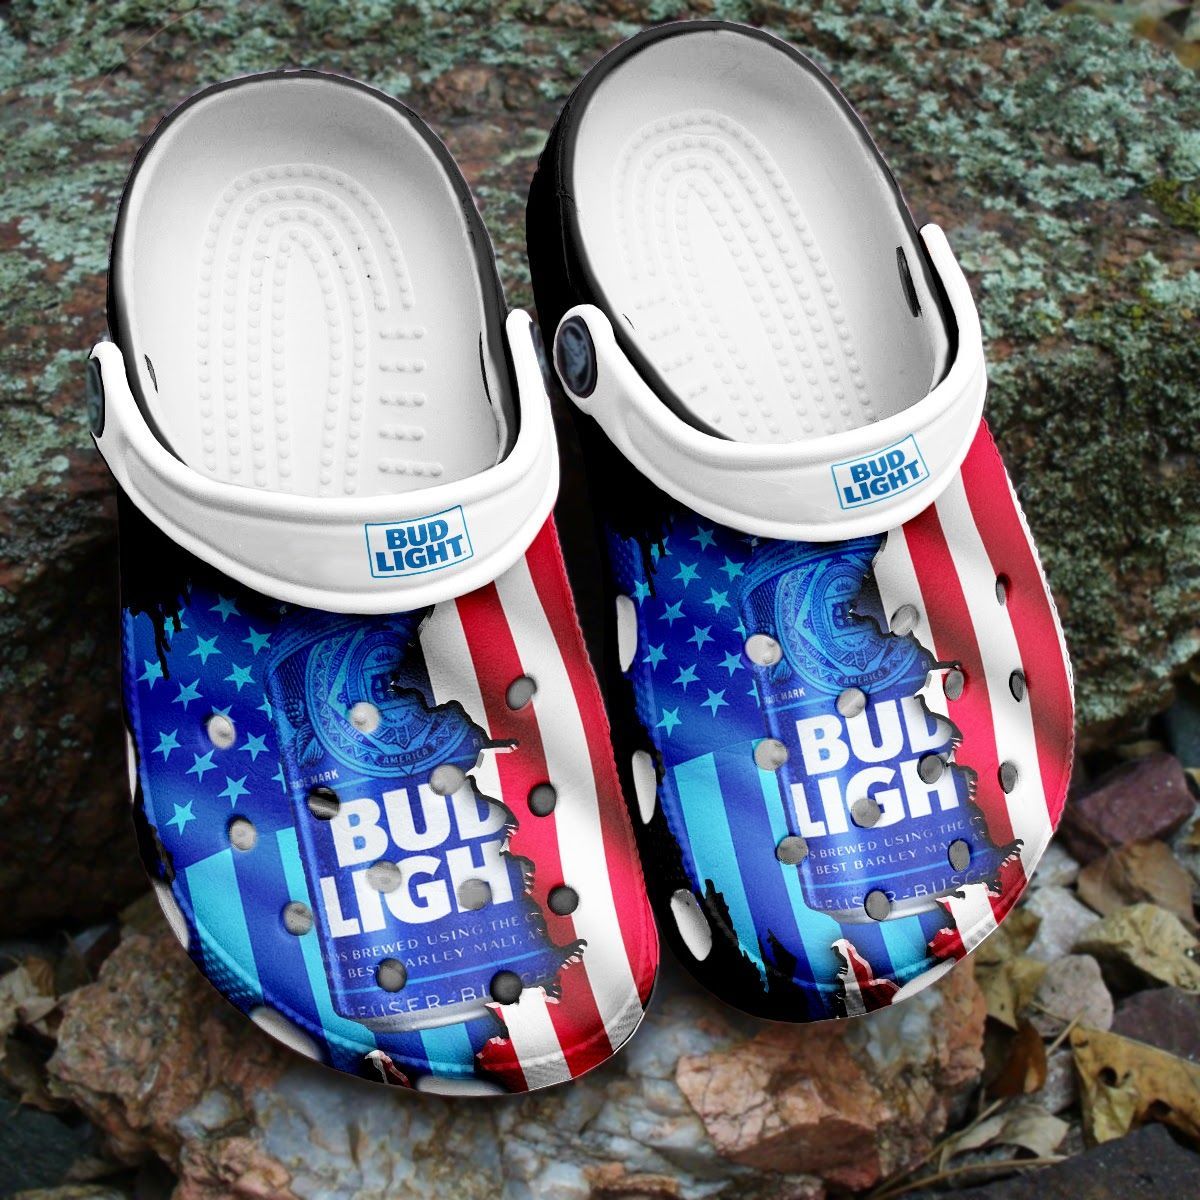 If you'd like to purchase a pair of Crocband Clogs, be sure to check out the official website. 120